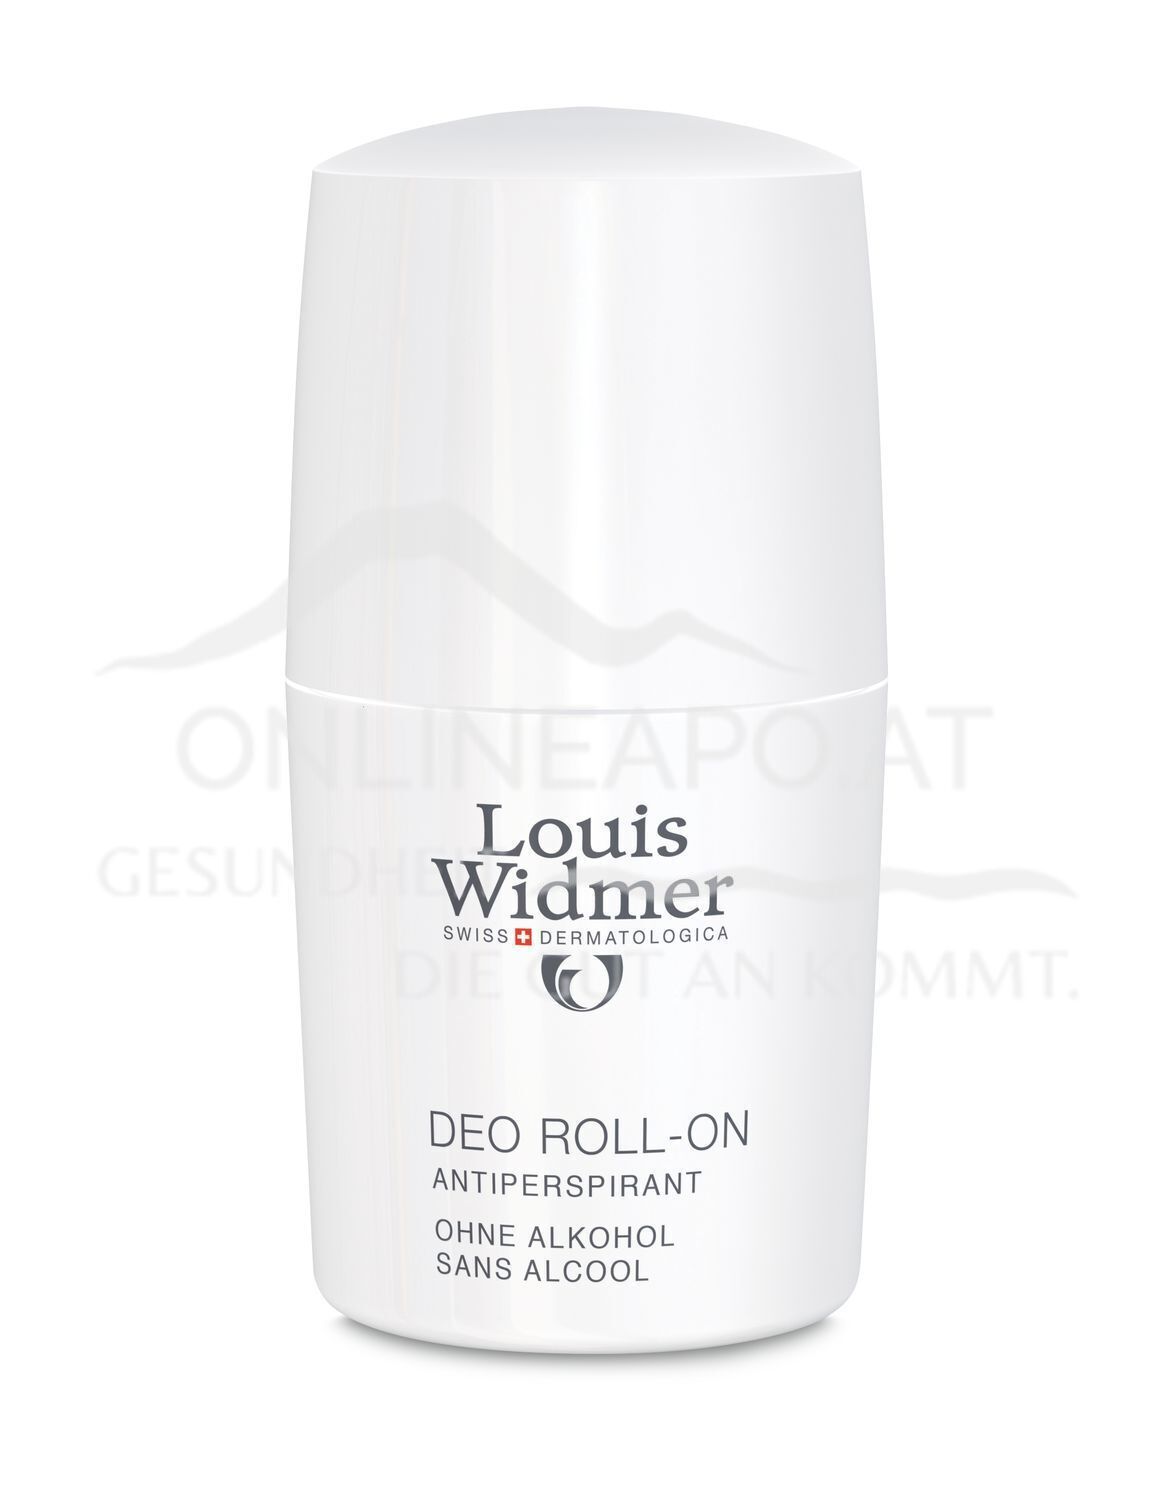 Louis Widmer Deo Roll-on